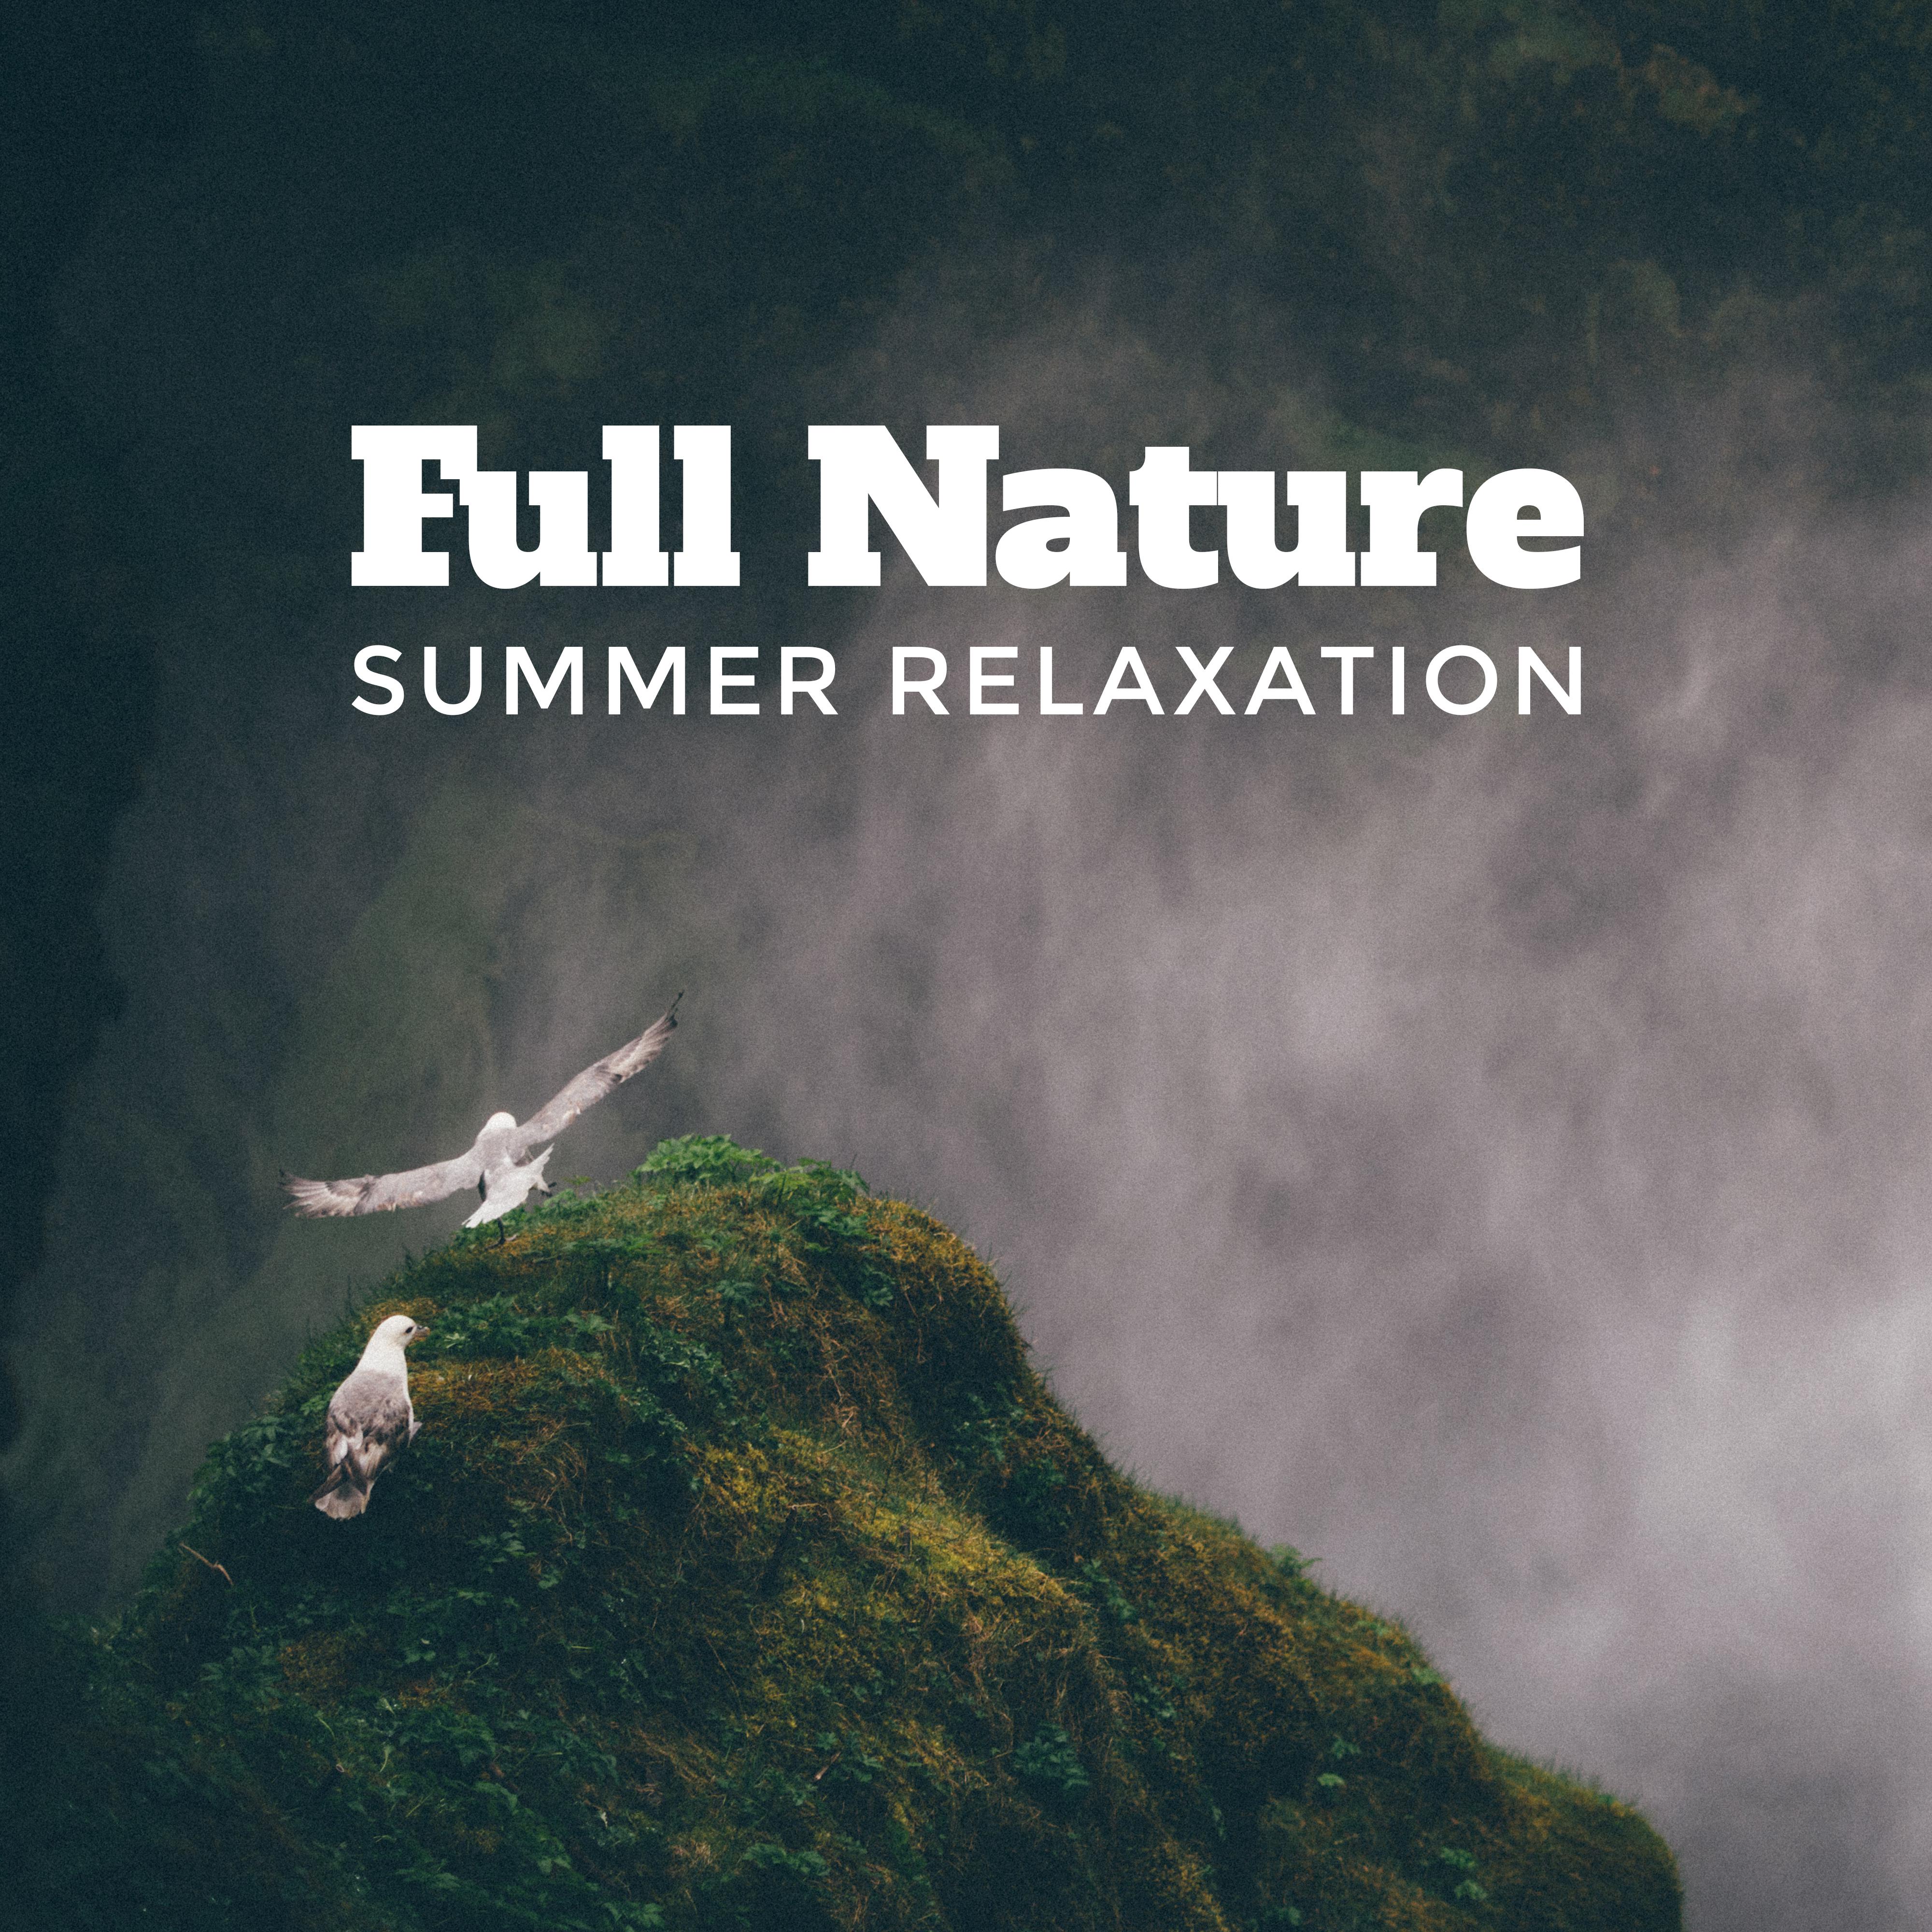 Full Nature Summer Relaxation: 2019 New Age Nature Music with Piano Melodies, Most Relaxing Sounds of Birds Singing, Flowing Water & Pouring Rain, Songs Perfect for Home Calm & Rest or Wellness Spa Salon